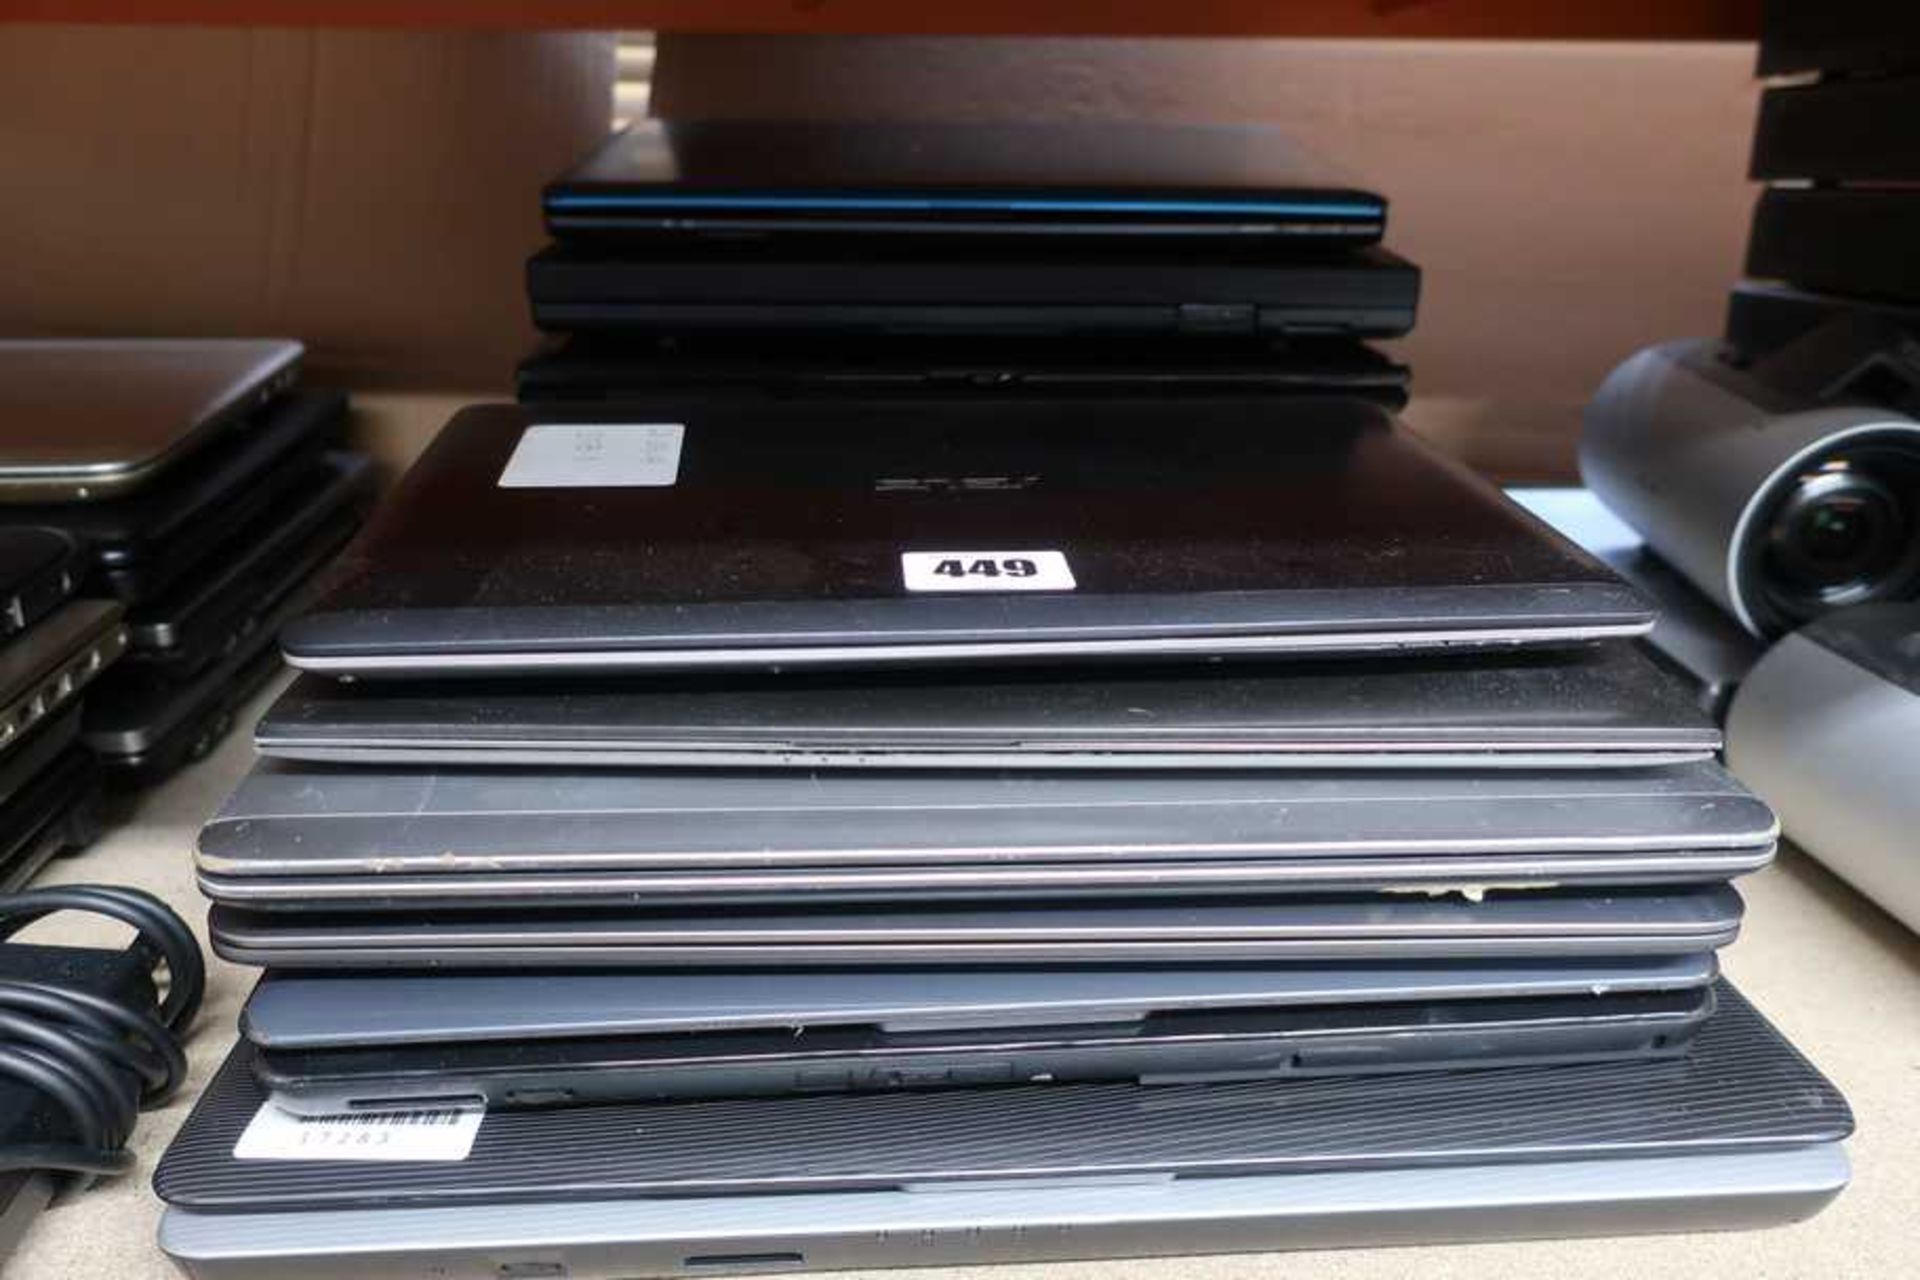 Thirteen pre-owned laptops sold for parts including Dell, Lenovo, Sony, Toshiba, Acer and Asus (